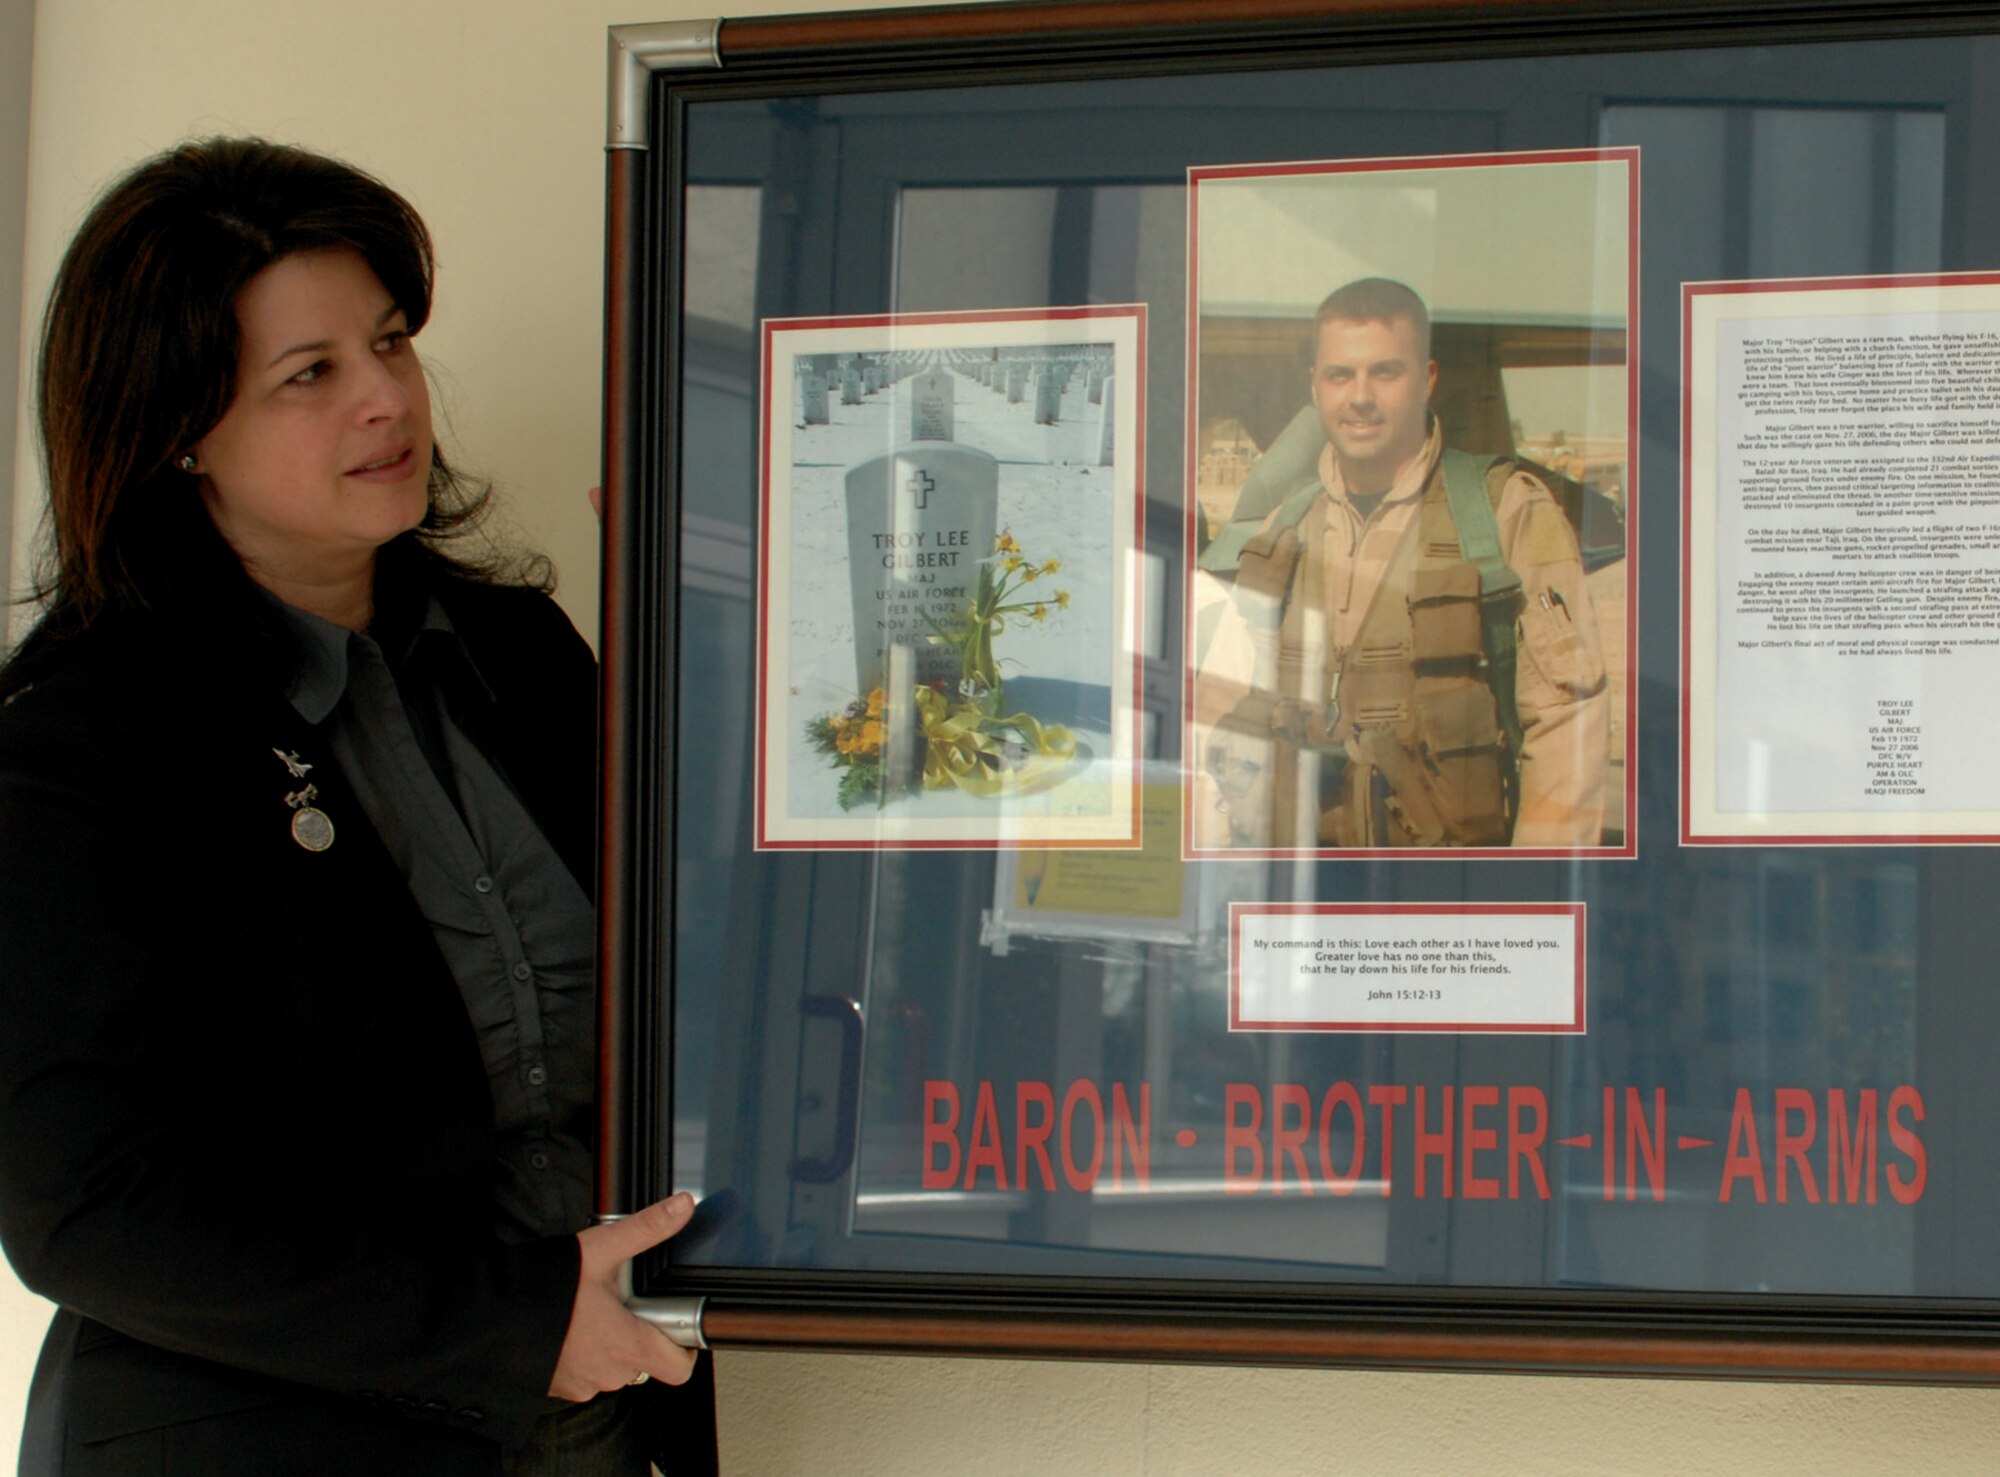 SPANGDHALEM AIR BASE, GERMANY – Lenora Woodcock, event coordinator and spouse William Woodcock, the former 23rd Fighter Squadron commander, helps hang a commemorative plaque hung in the memory of Maj. Troy Gilbert. Major Gilbert graduated from BHS in 1989 feeling a need to serve his country. While serving in support of Operation Iraqi Freedom he lost his life when his F-16 crashed 20 miles northwest of Baghdad. (US Air Force photo by Airman 1st Class Emily Moore)